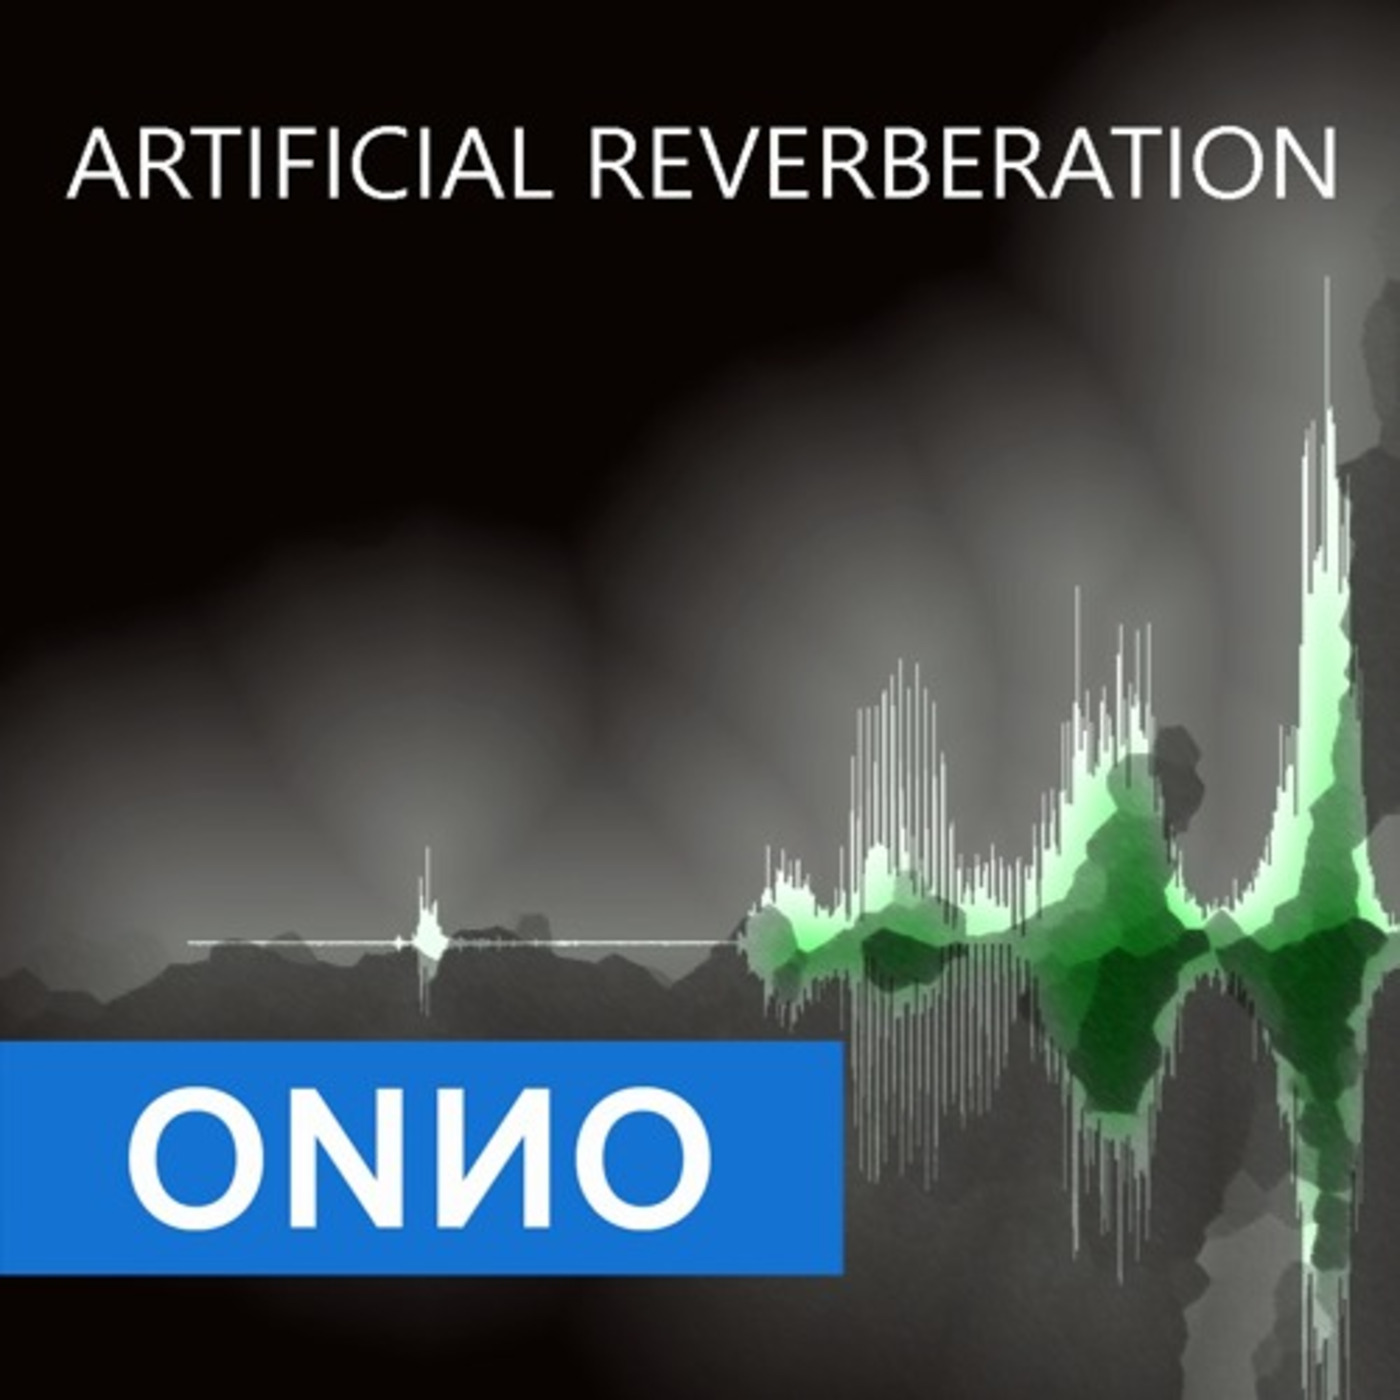 Onno Boomstra - Artificial Reverberation